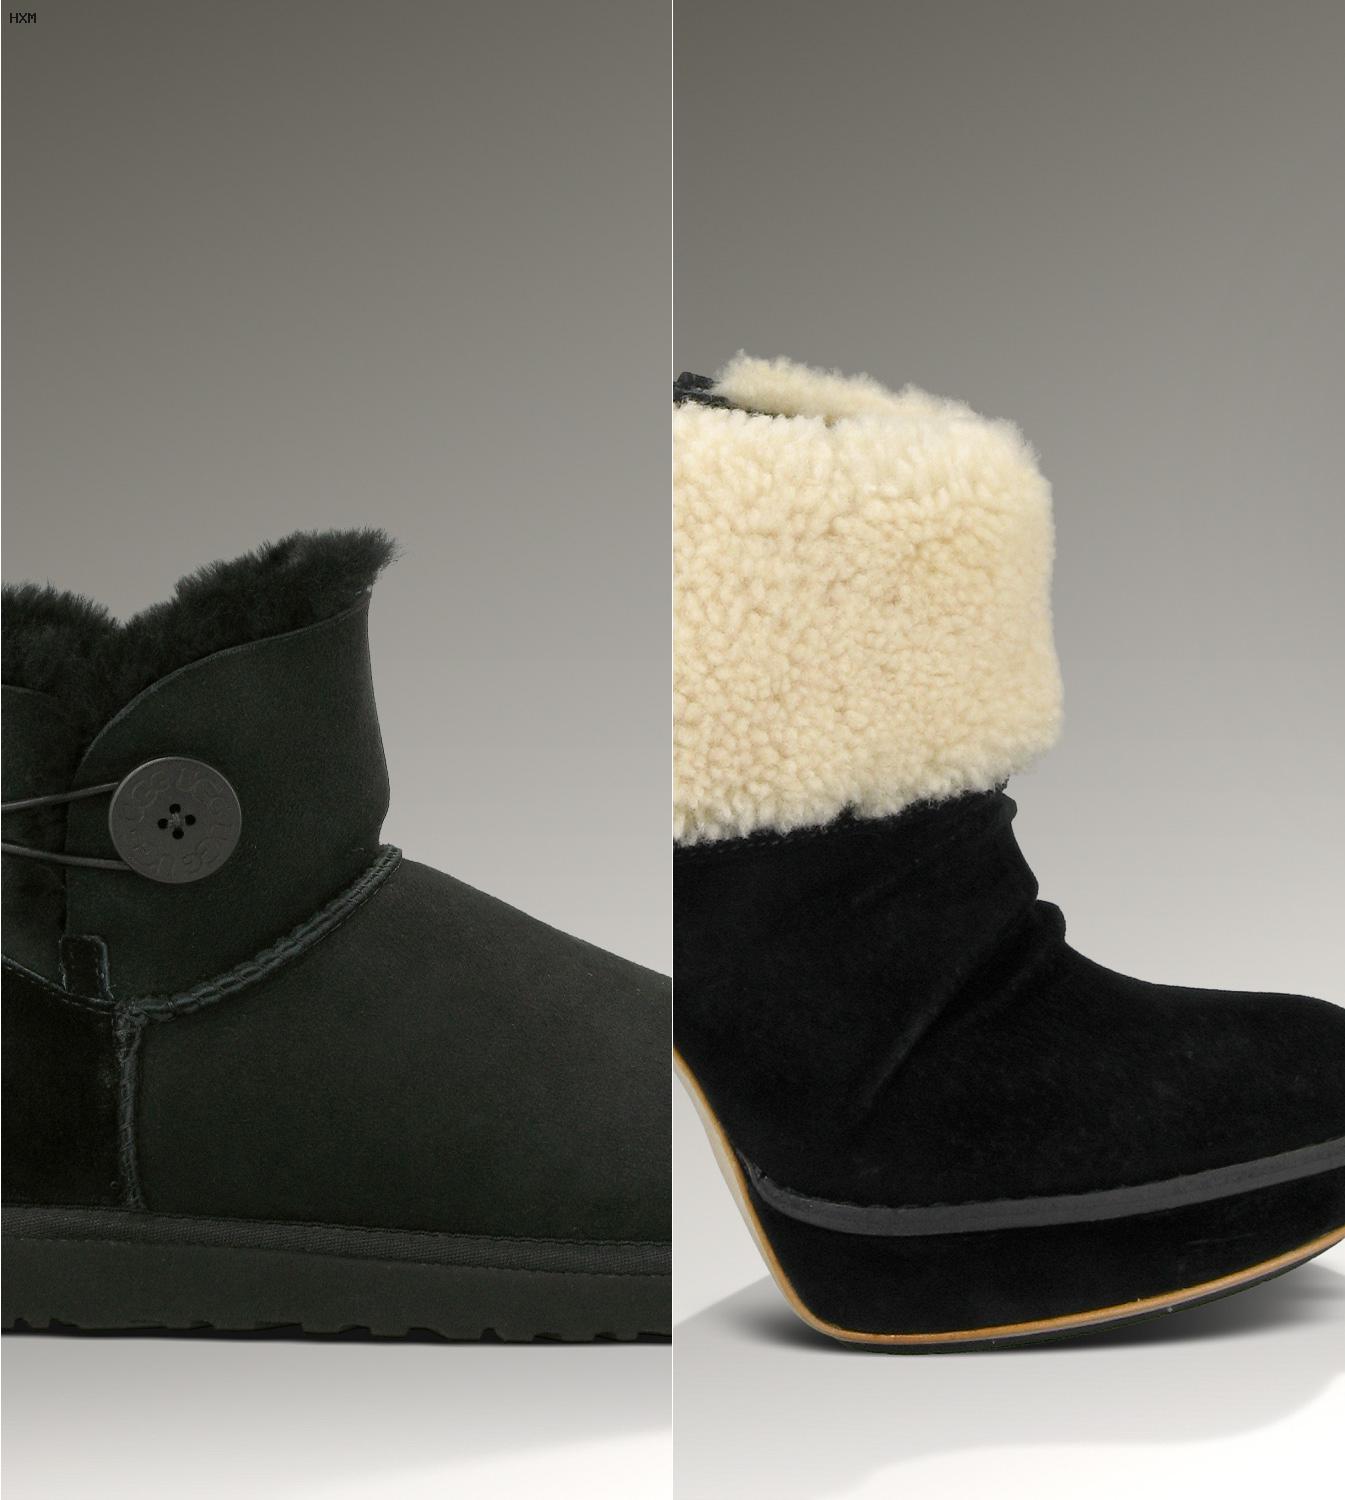 magasin chaussures ugg paris